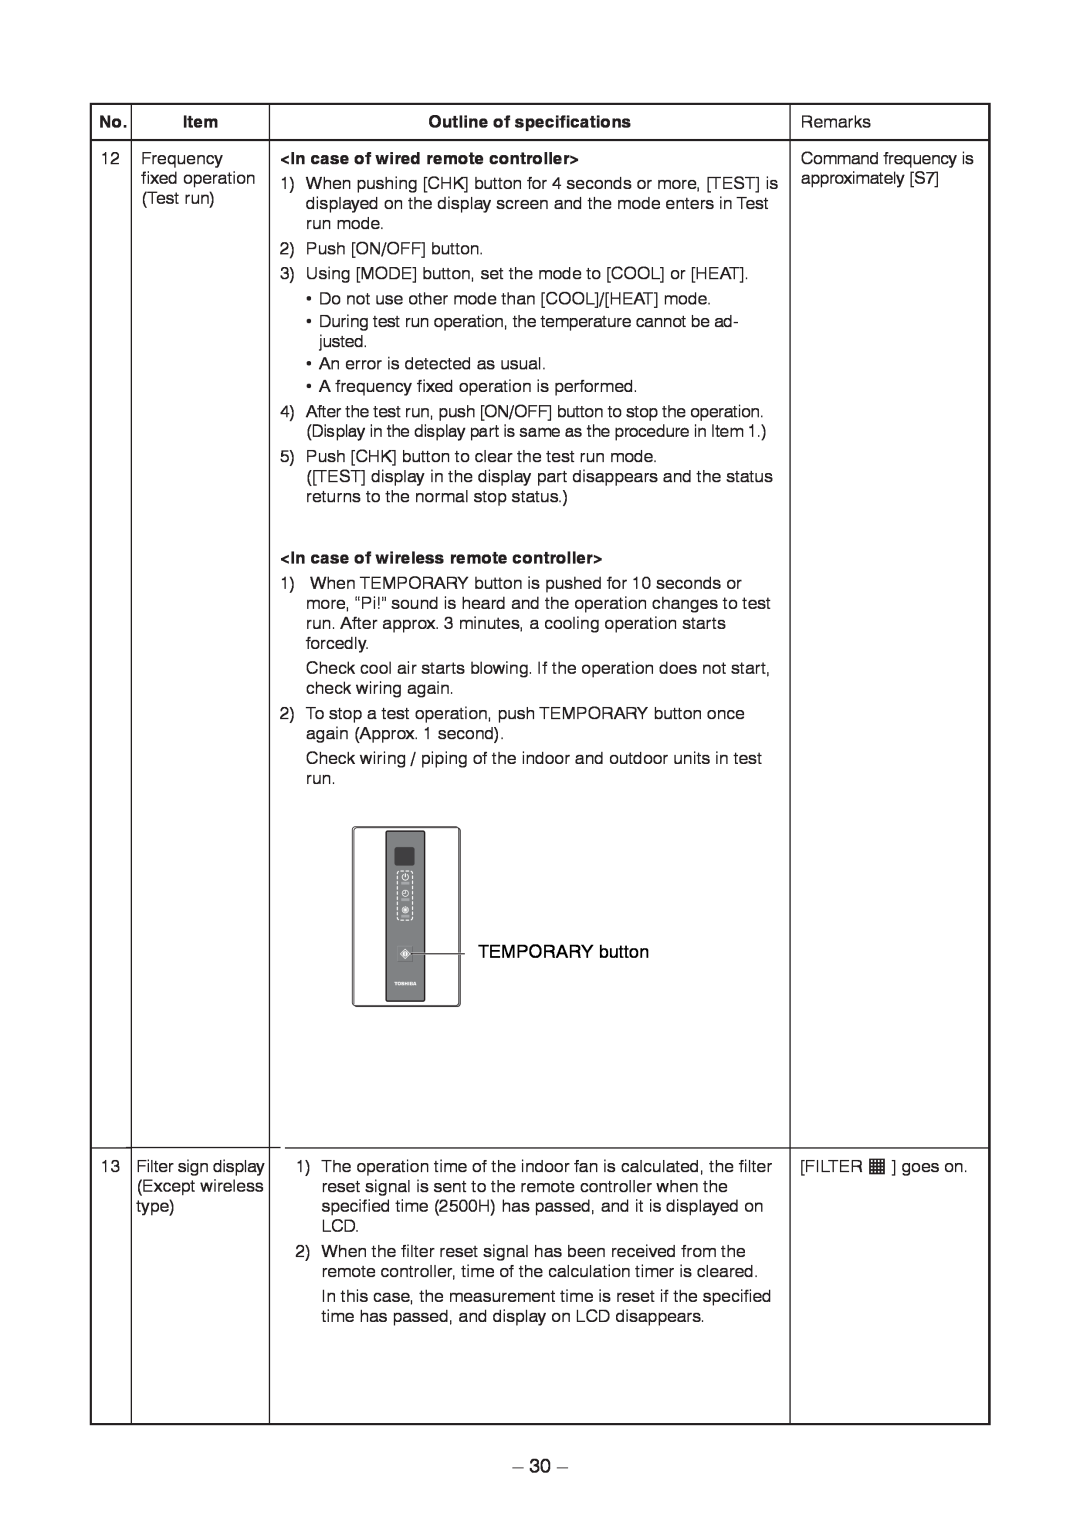 Toshiba RAV-SM1406BT-TR, RAV-SM406BT-TR Outline of specifications, Remarks, In case of wired remote controller 